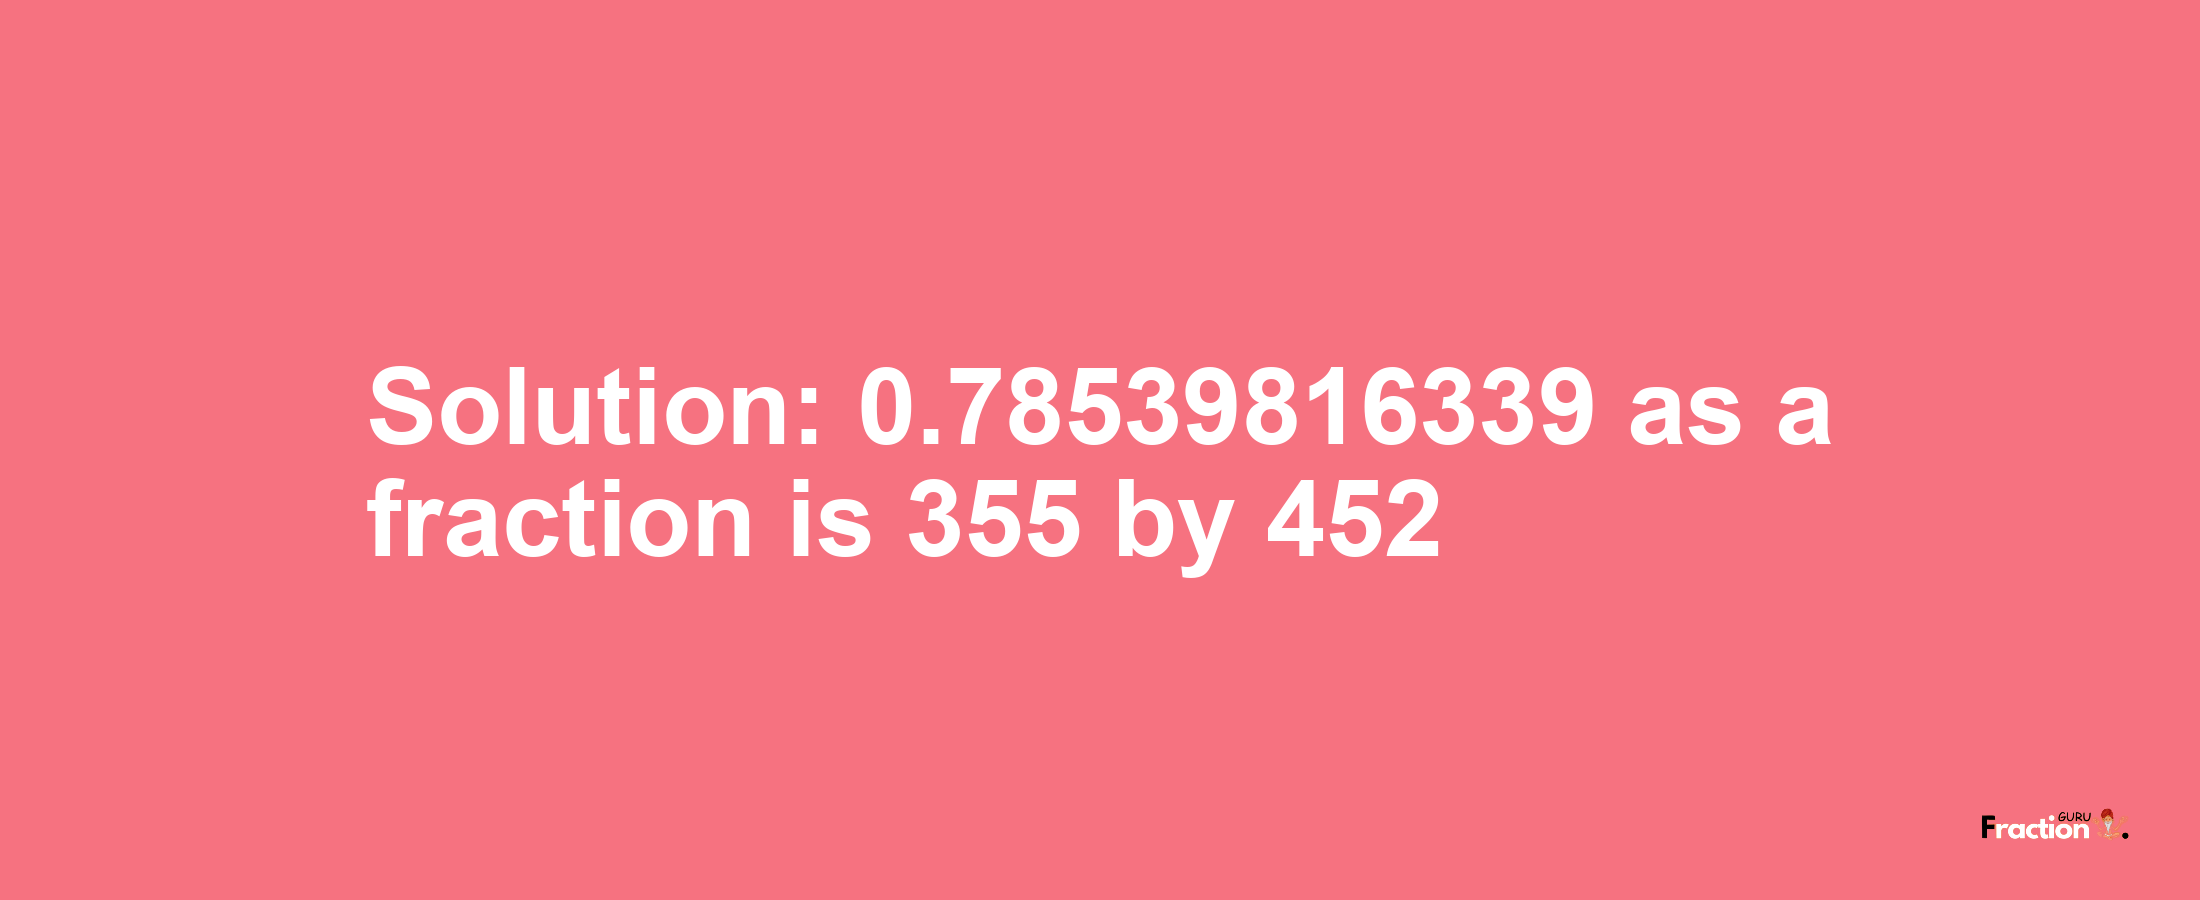 Solution:0.78539816339 as a fraction is 355/452